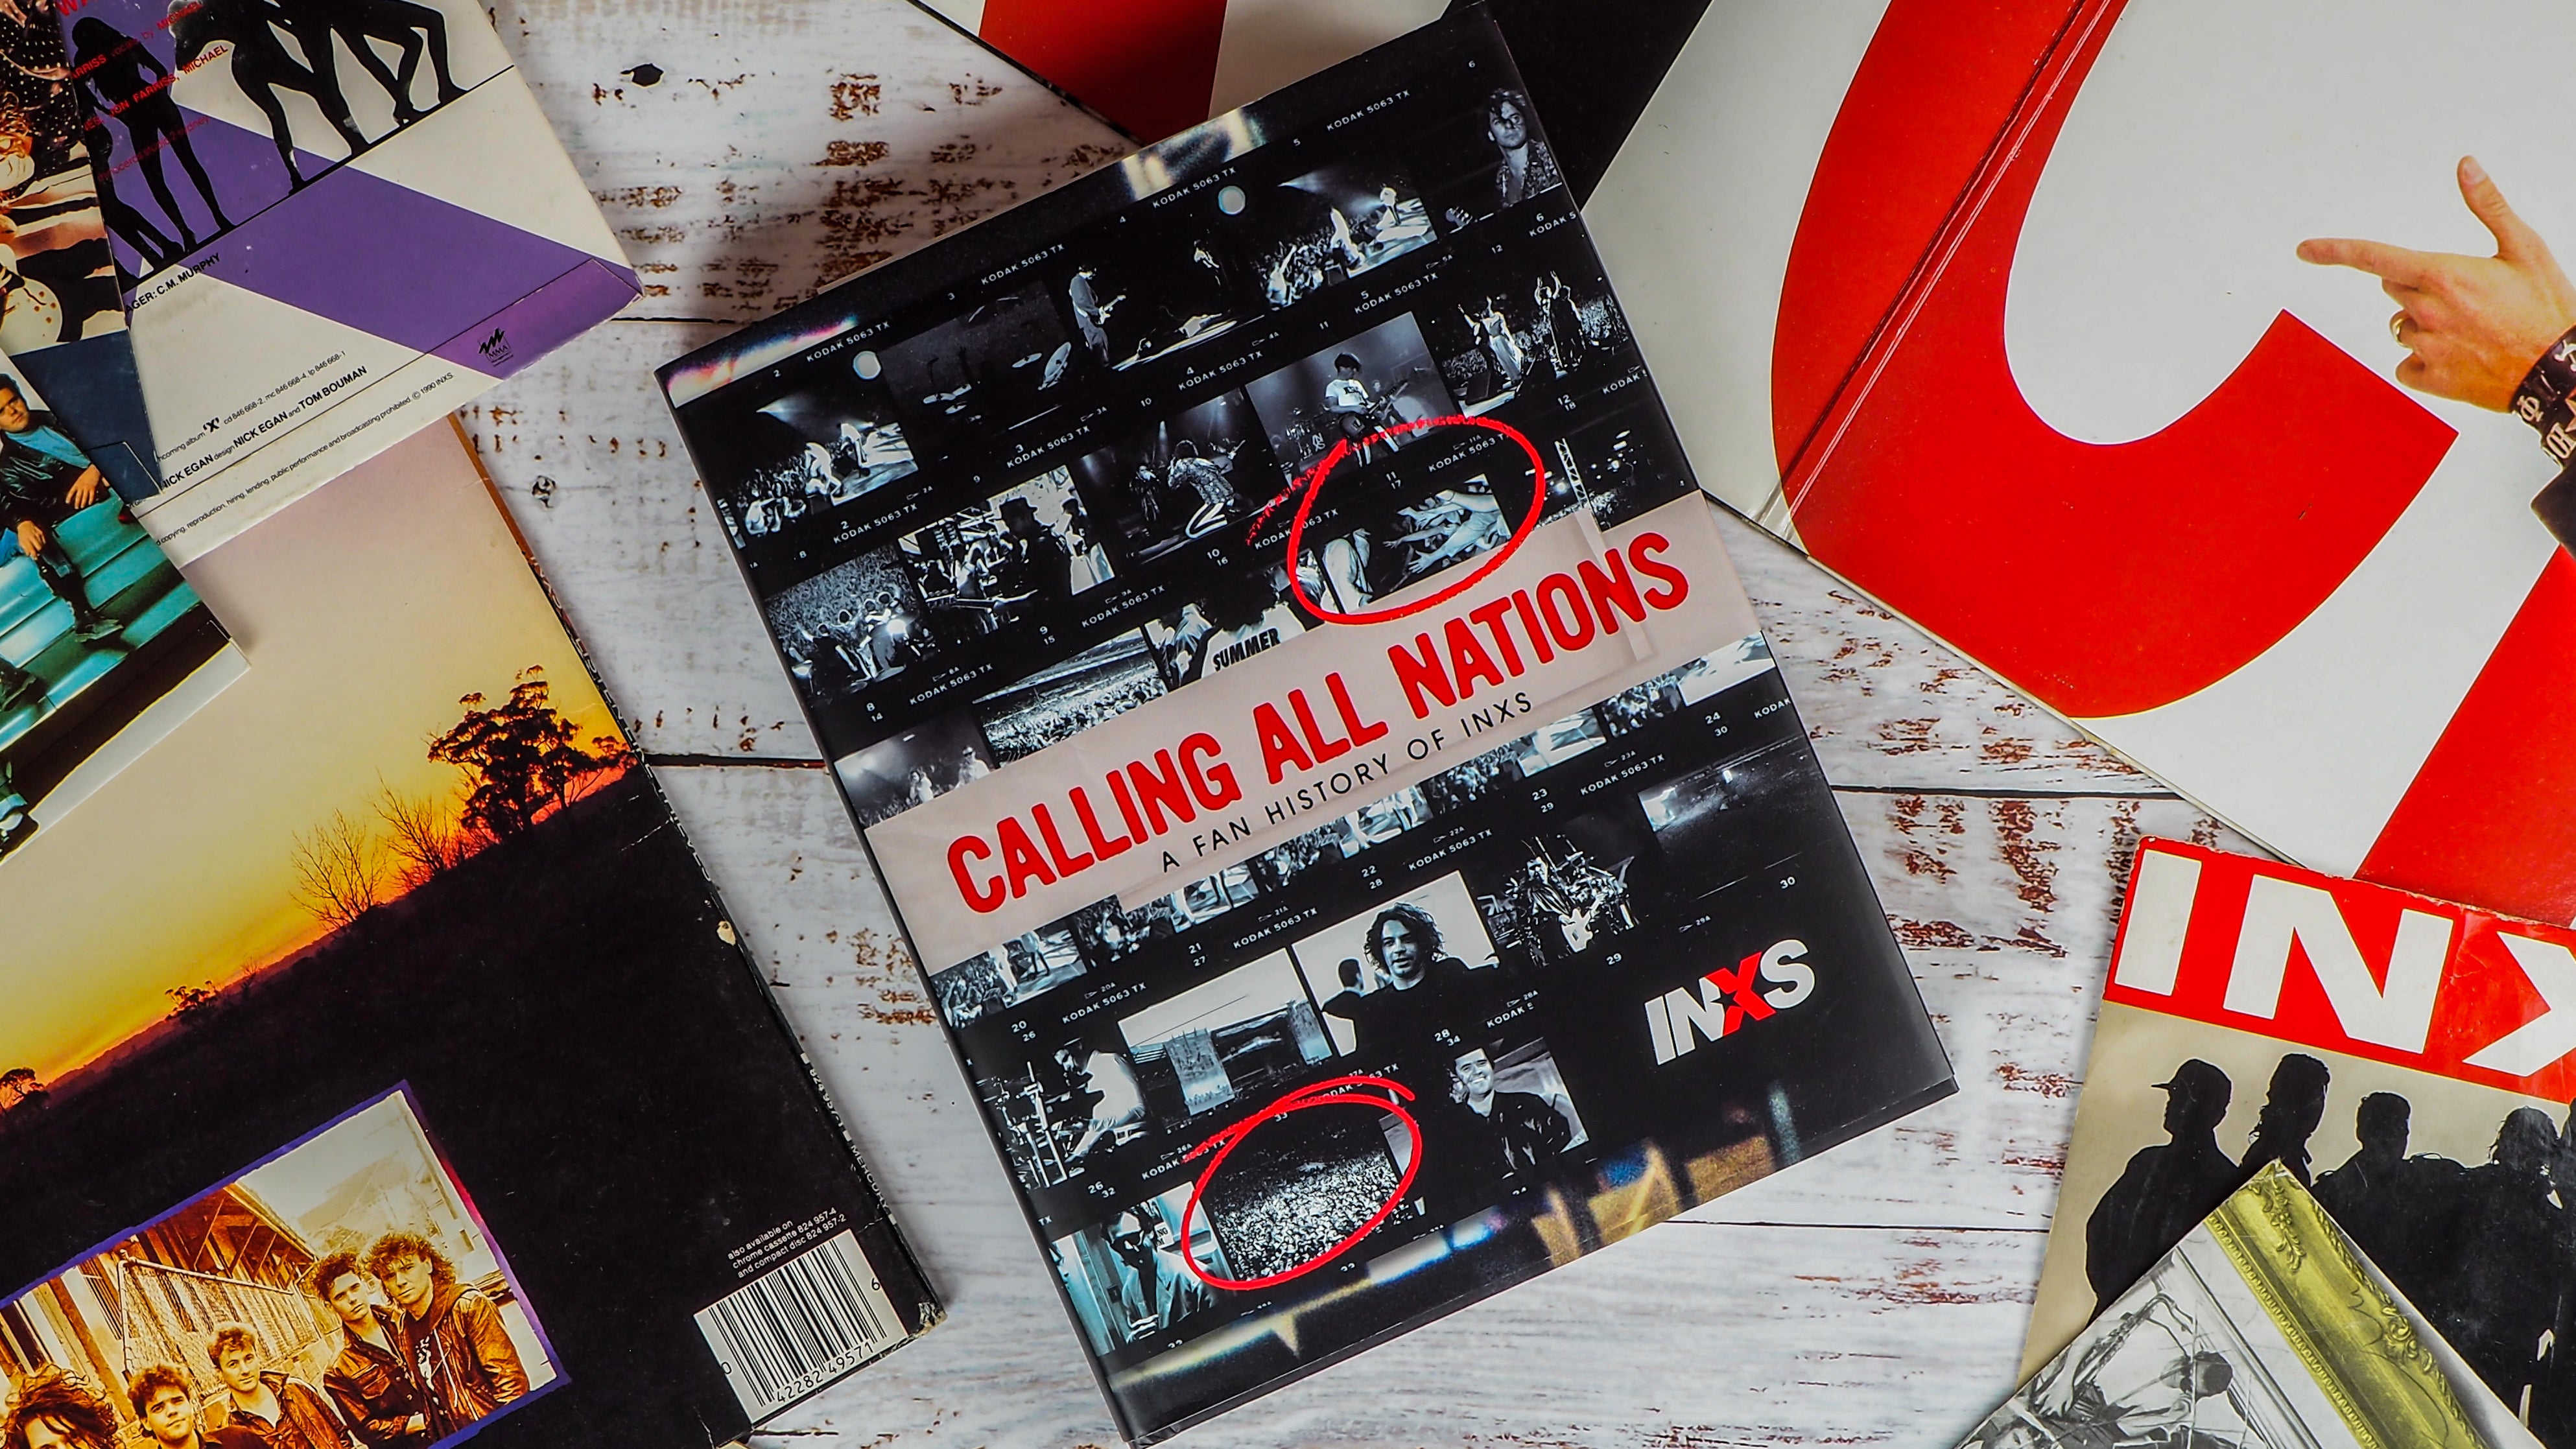 INXS - Calling All Nations: A Fan History of INXS (First Edition)